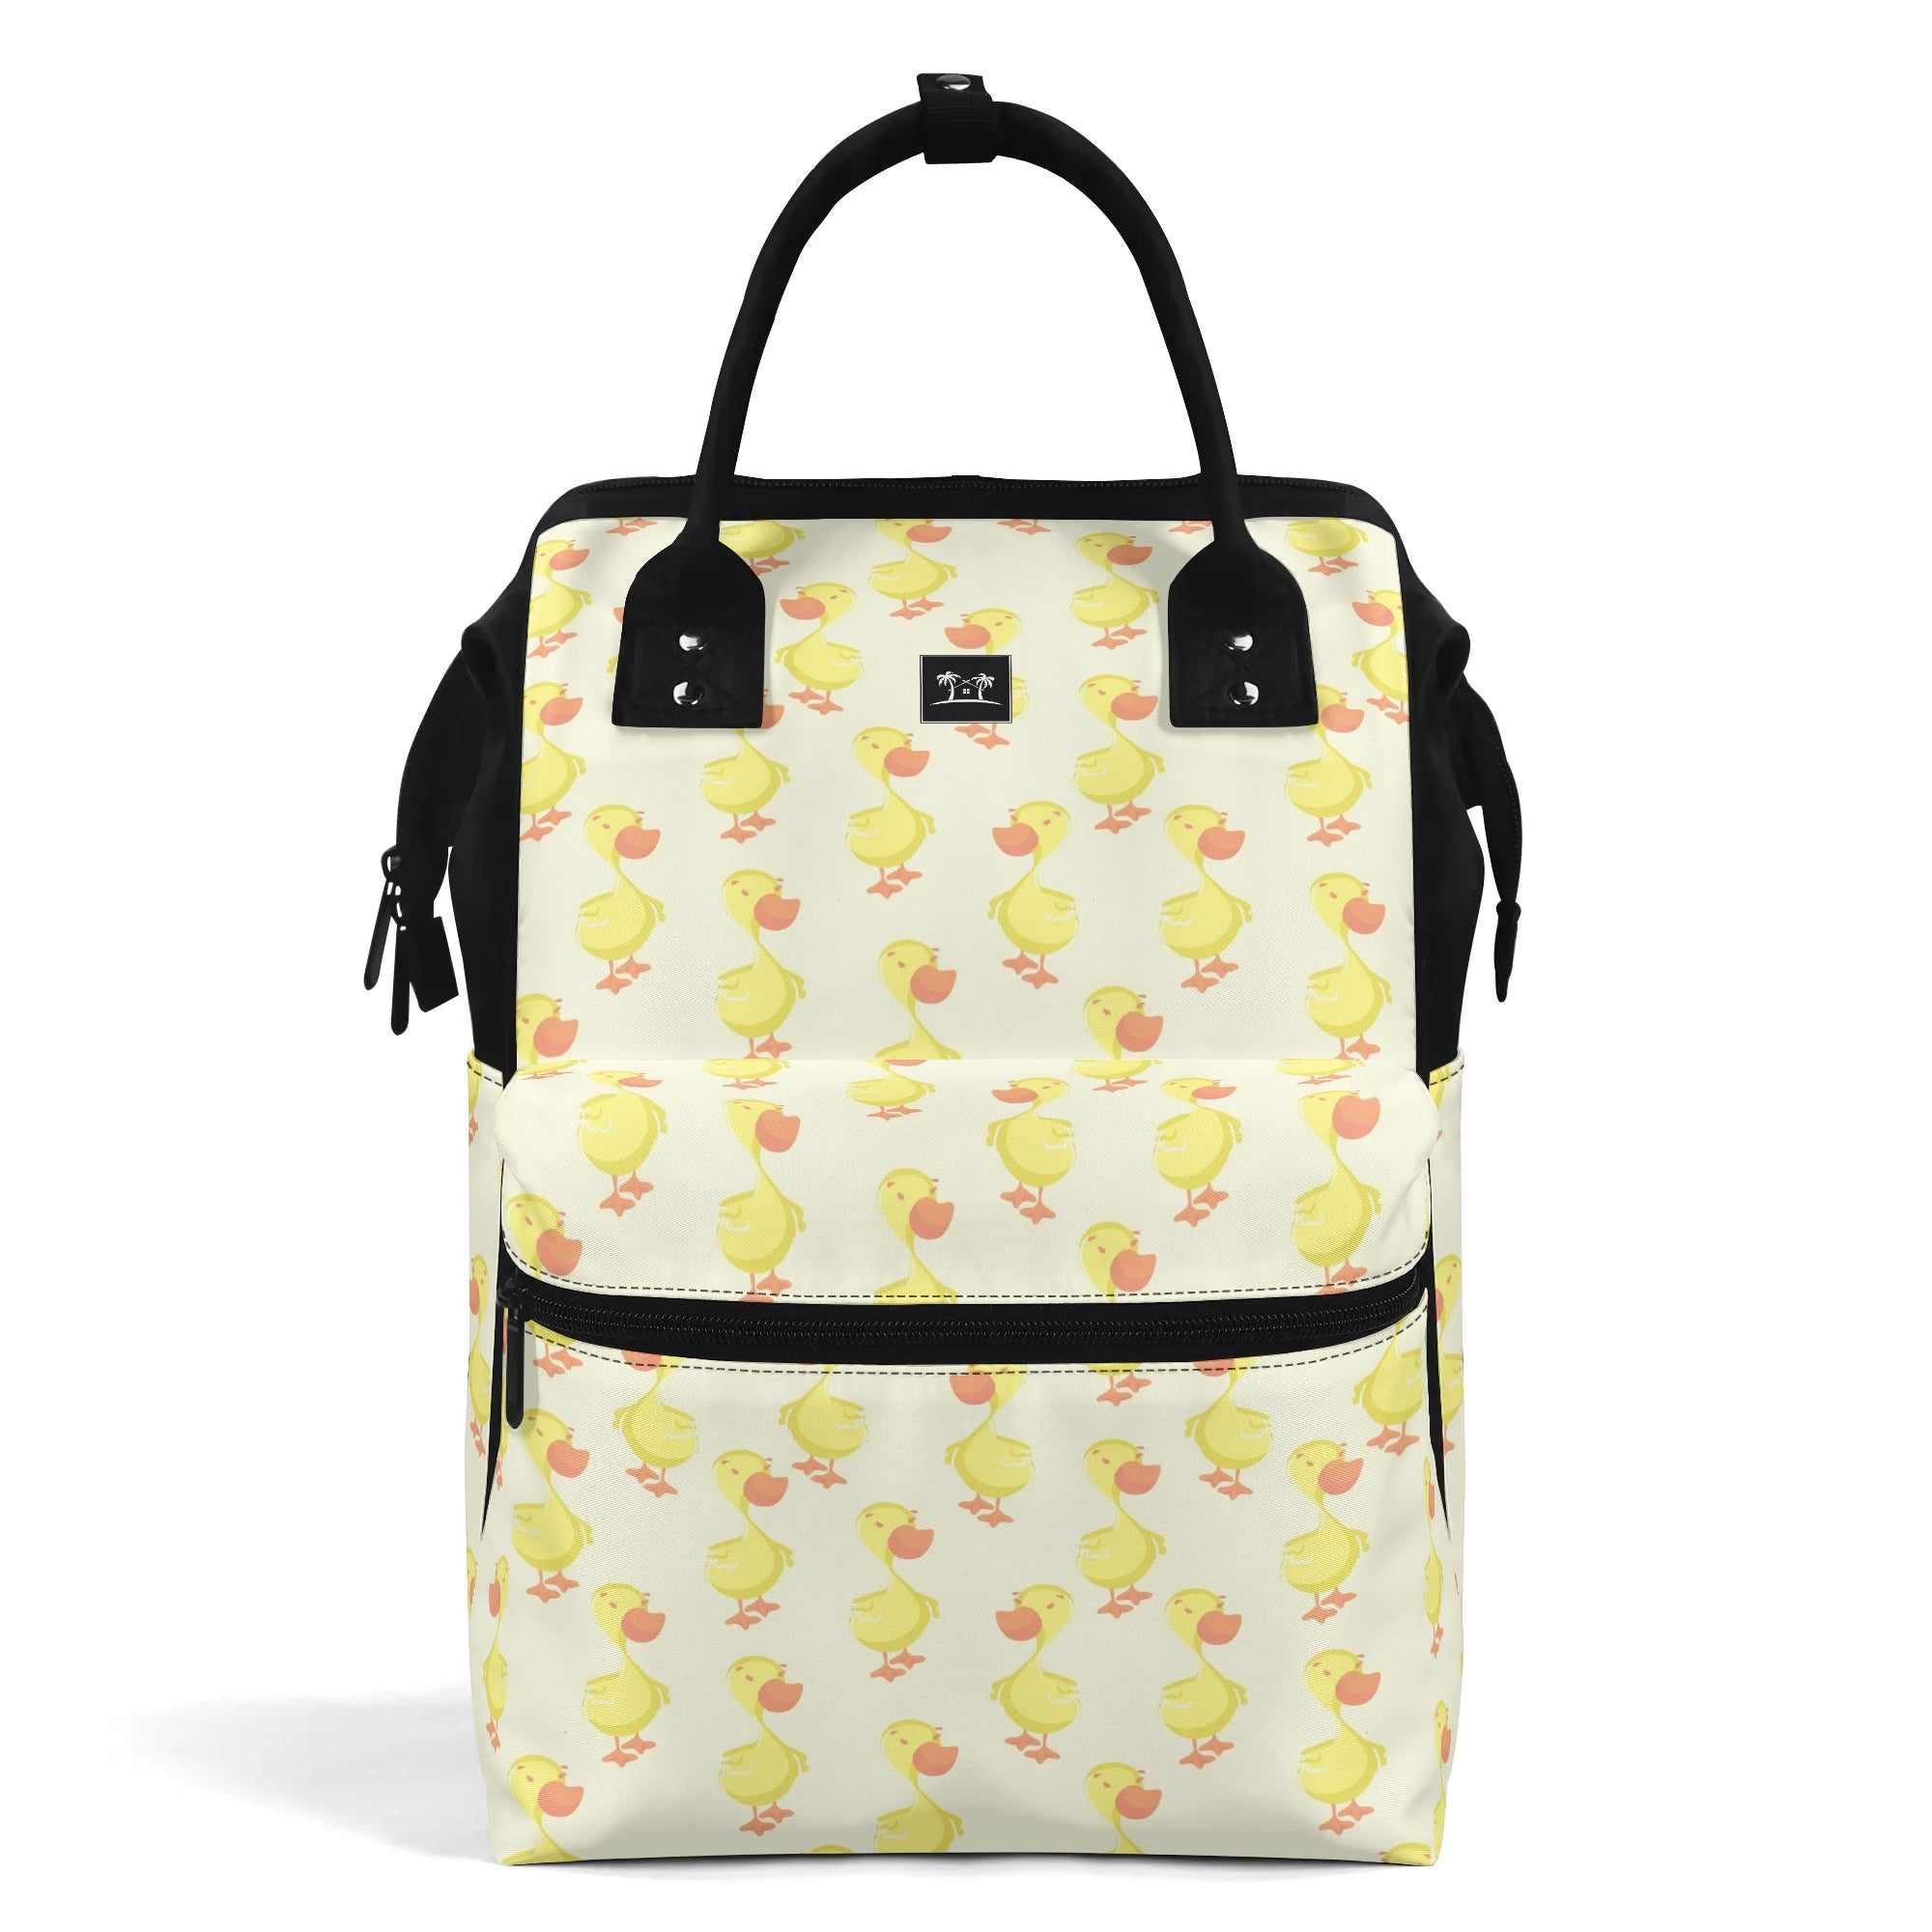 Large Capacity Diaper Backpack - Ducks in a Row (Cream)